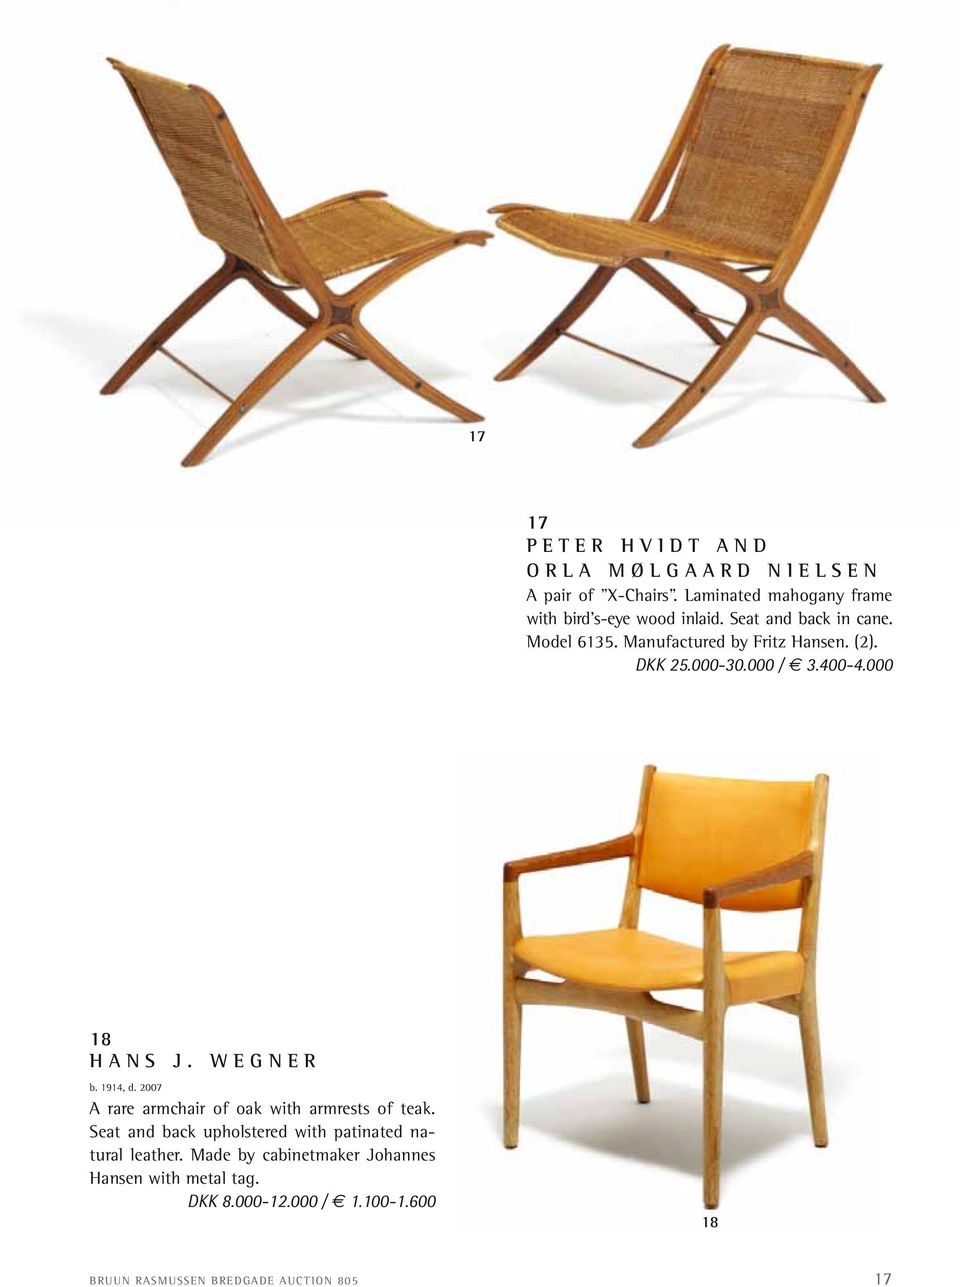 1914, d. 2007 A rare armchair of oak with armrests of teak. Seat and back upholstered with patinated natural leather.